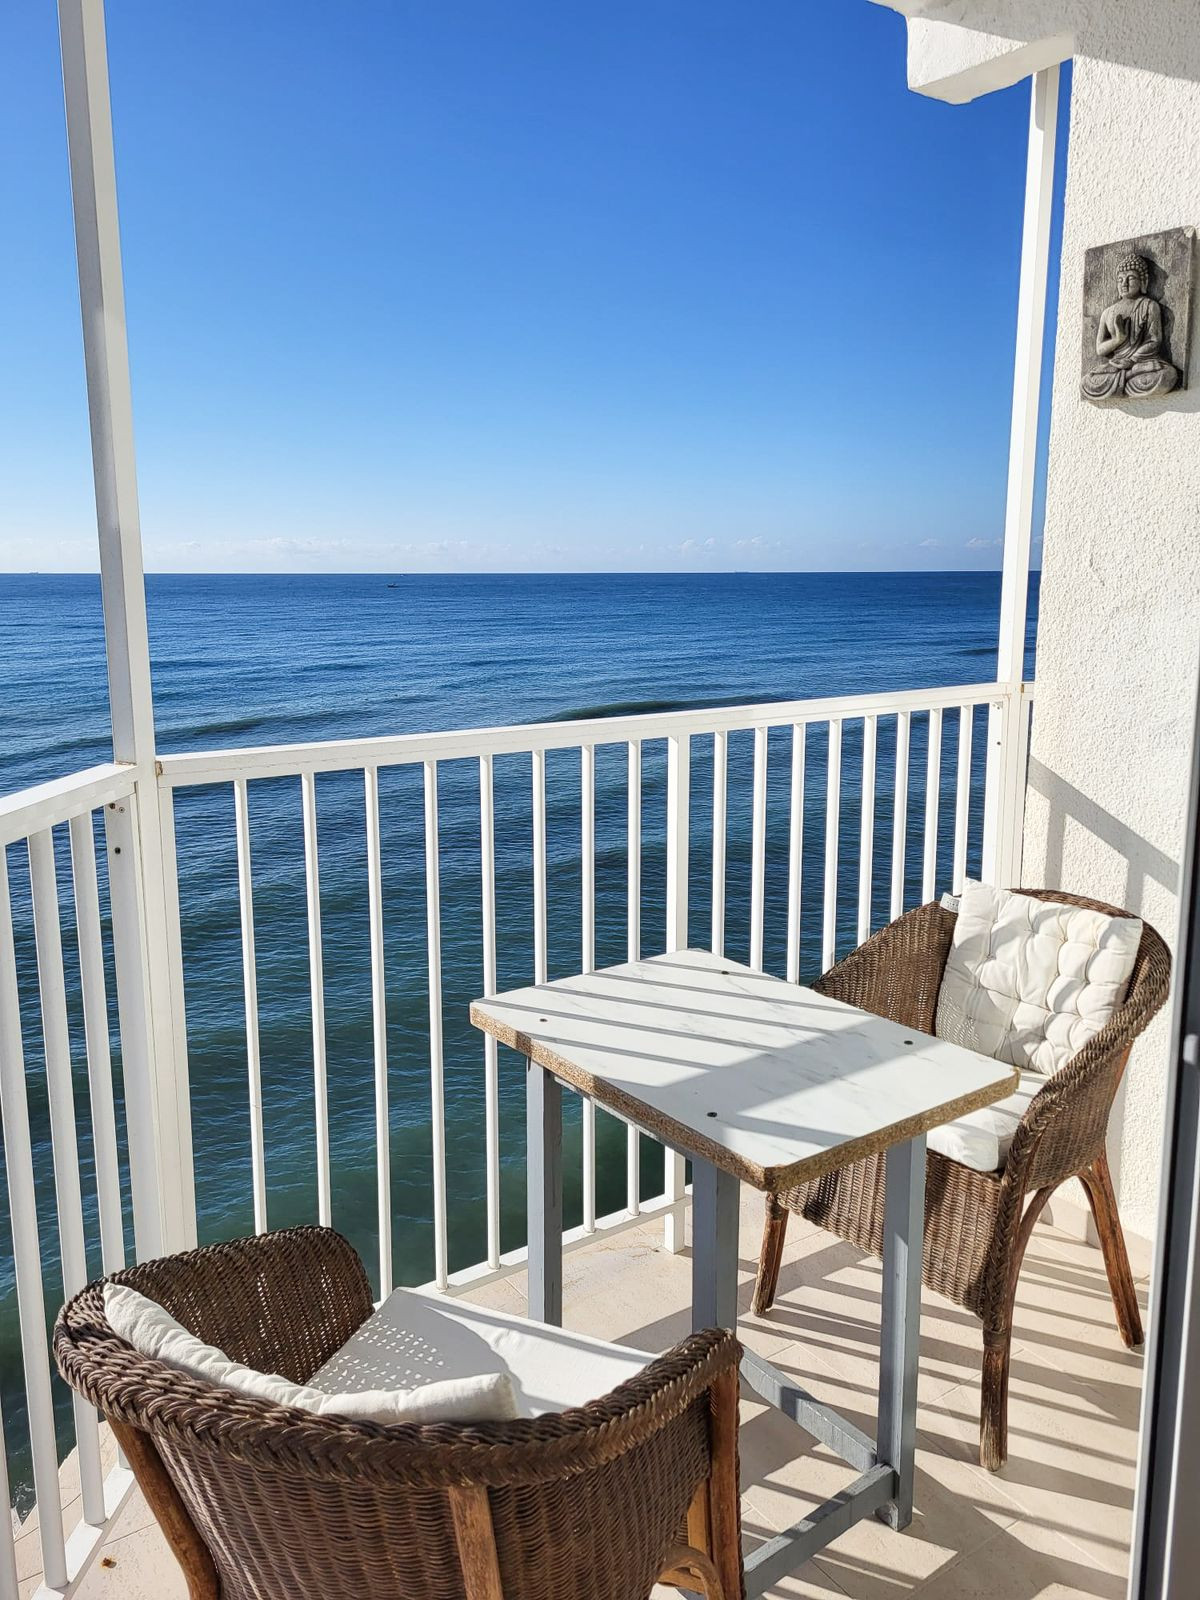 FIRST LINE BEACH!

Located steps away from the beach we find this excellent apartment with panoramic, Spain